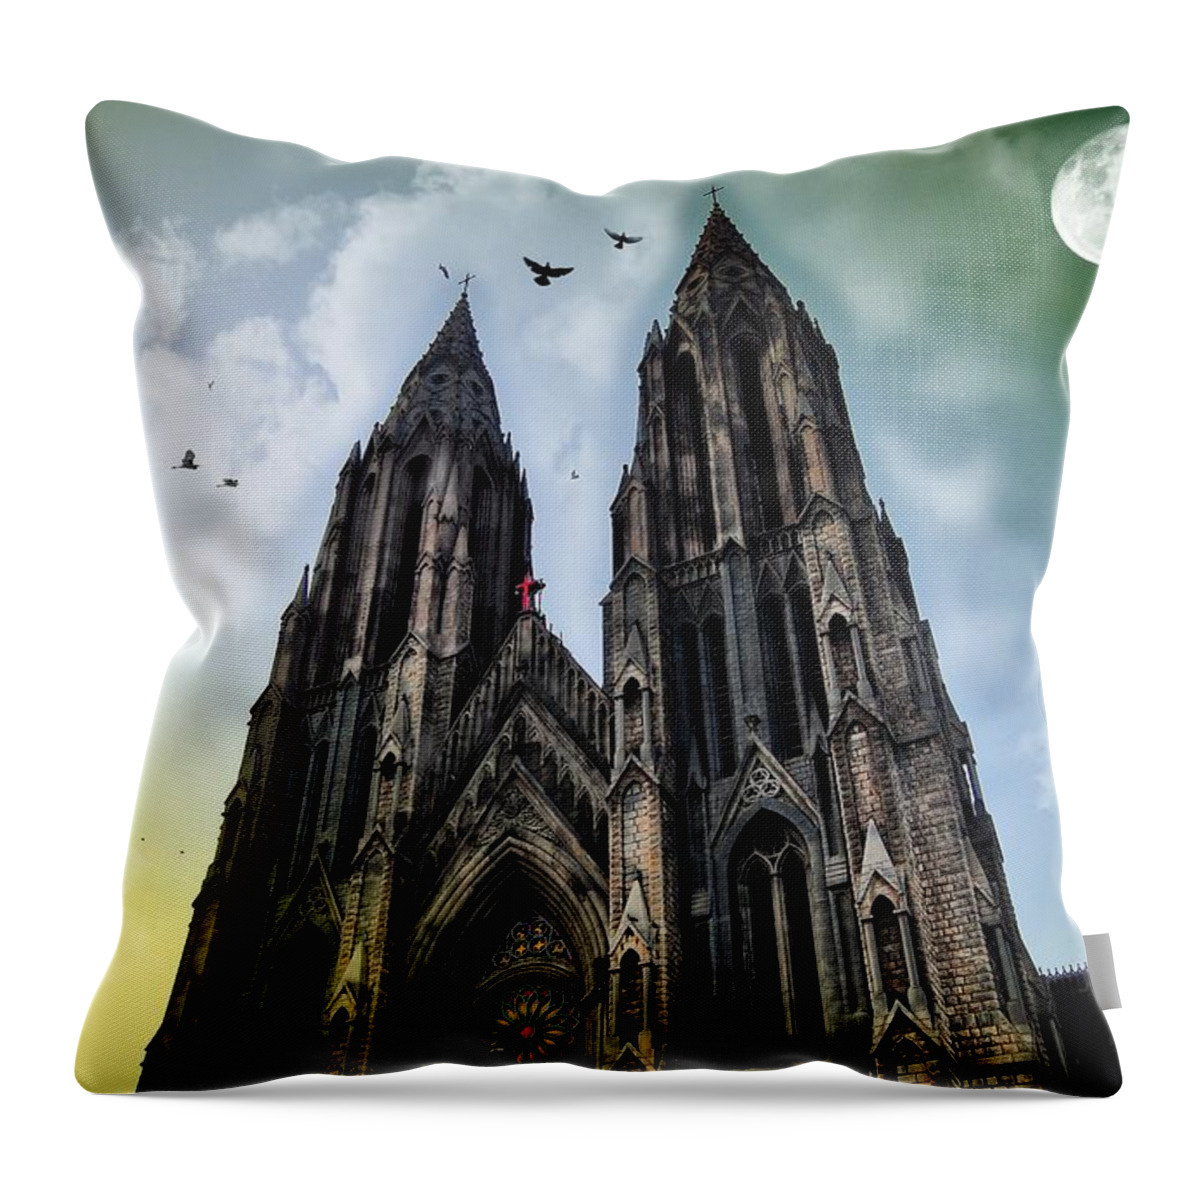 Tranquility Throw Pillow featuring the photograph Old Church by Nilmoni Ghosh Photography